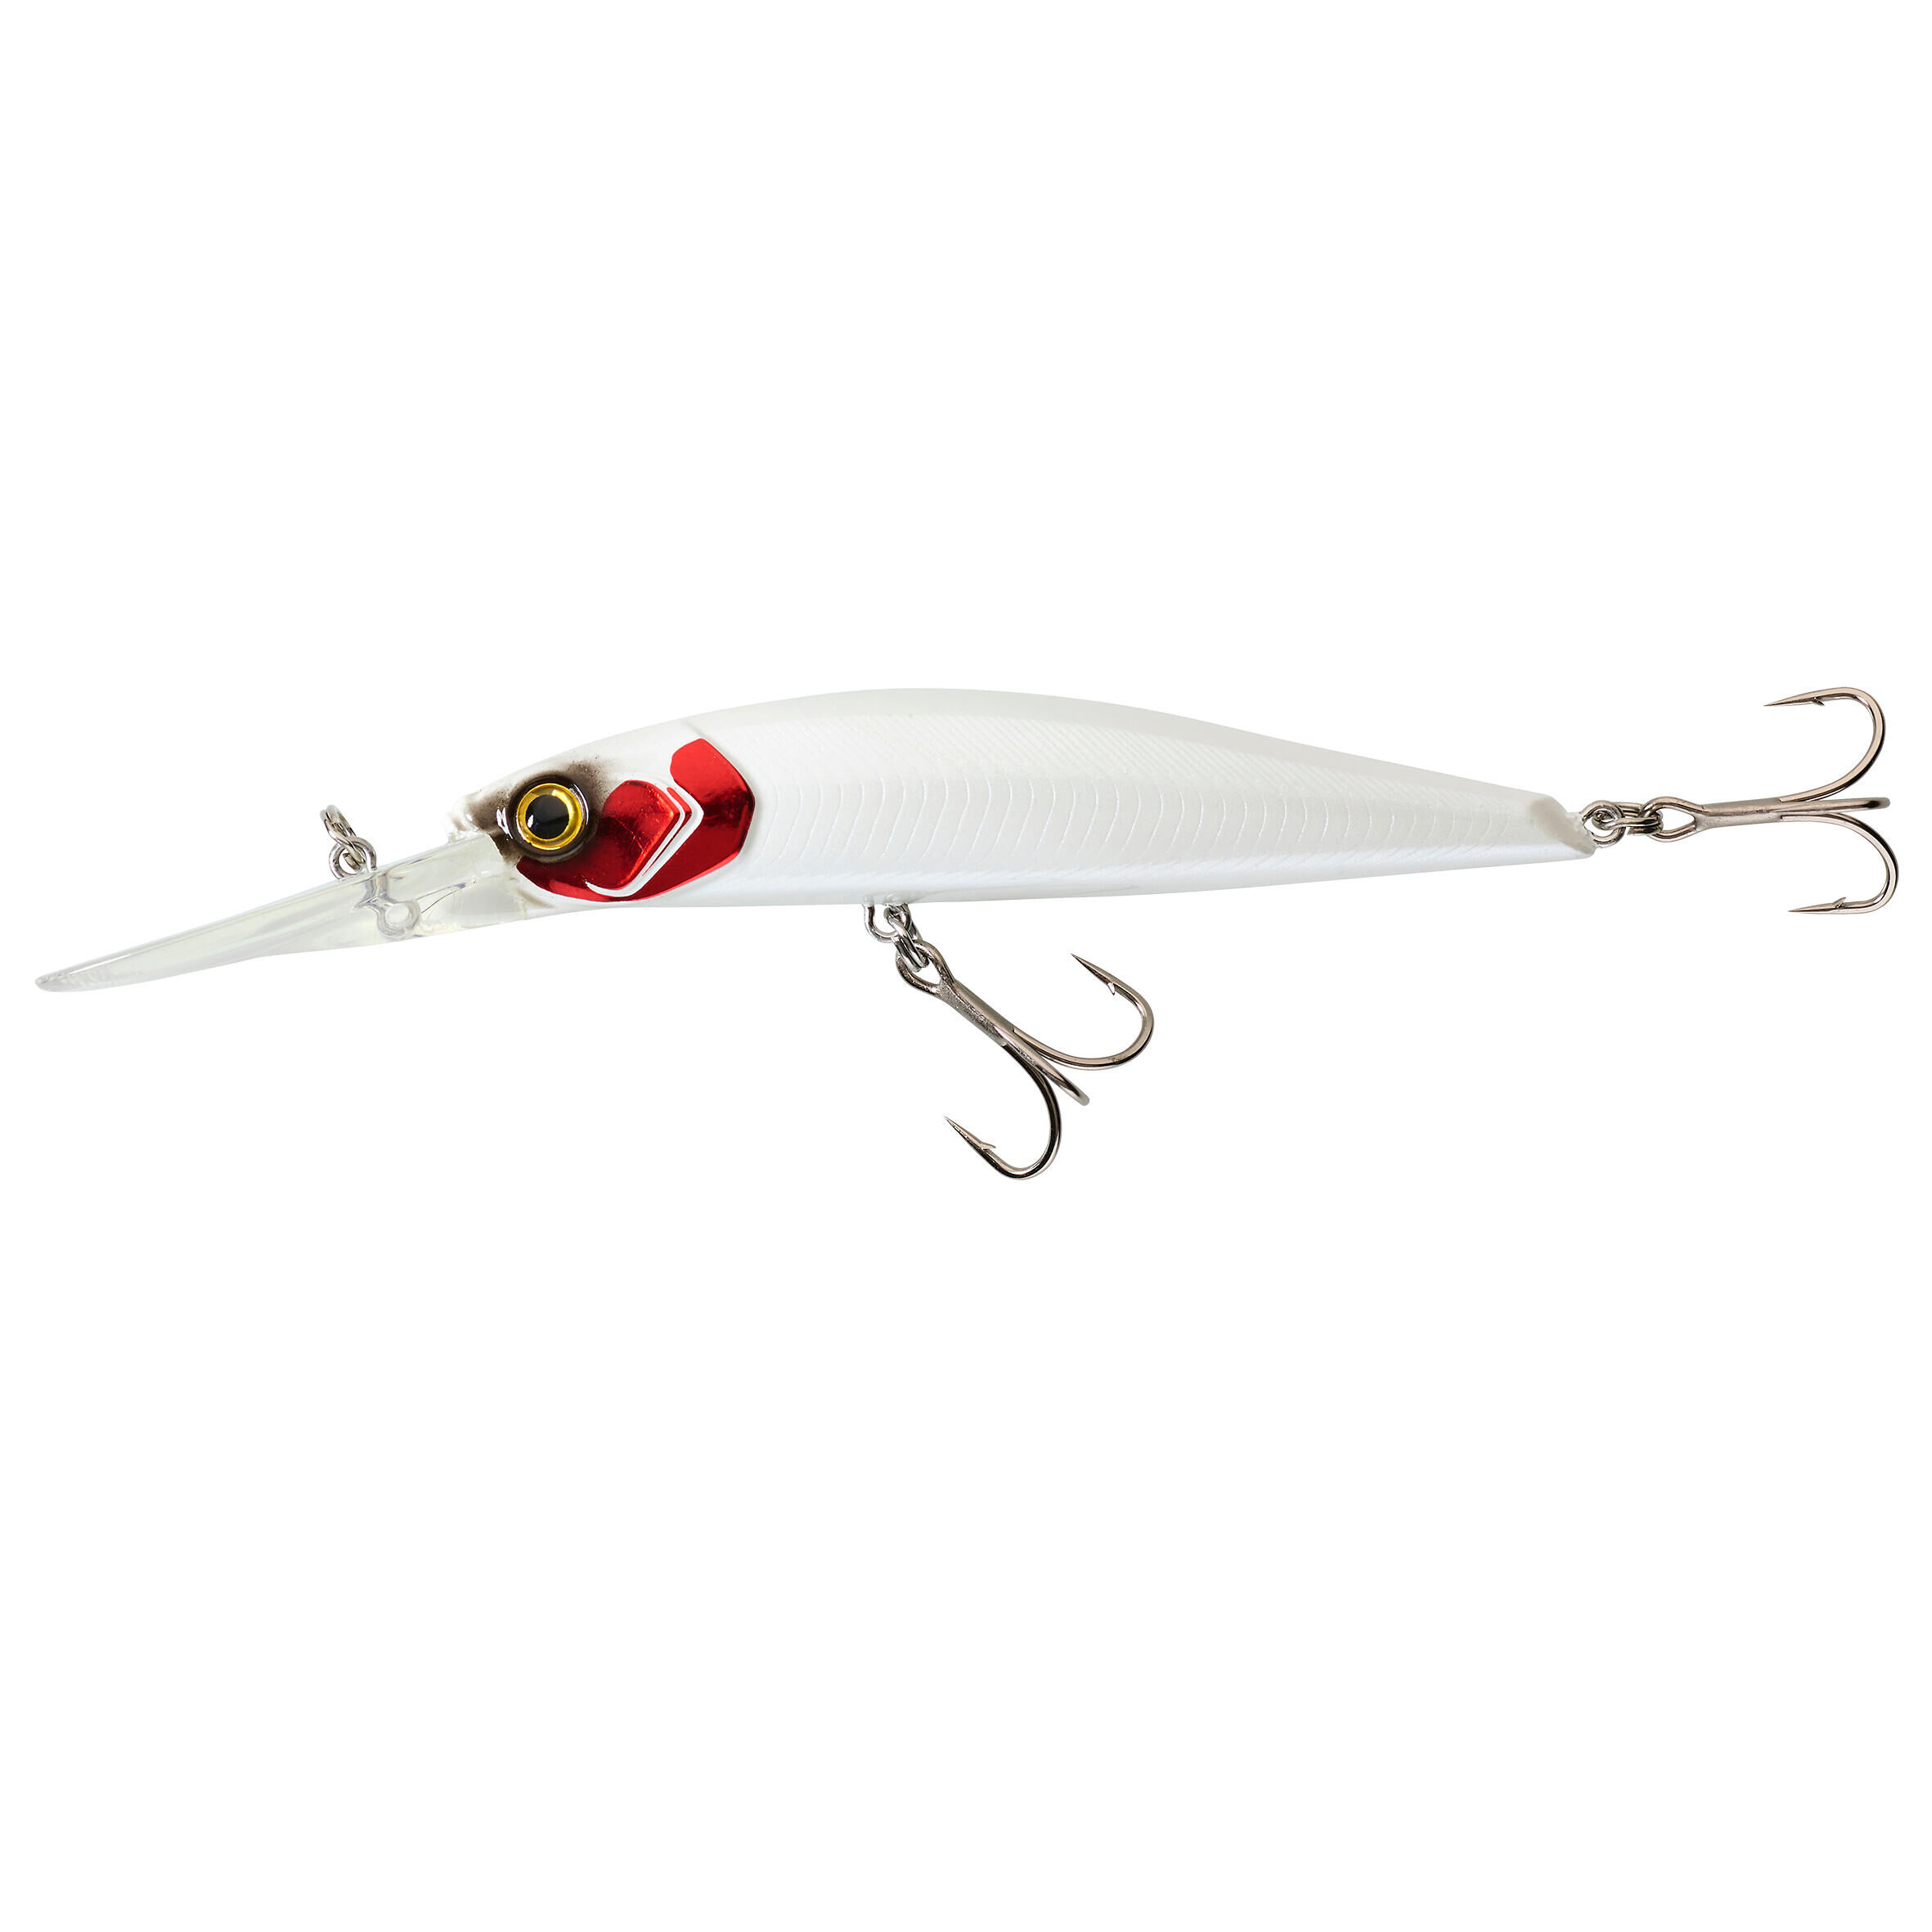 CAPERLAN Lure fishing at sea Hard Lure TOWY 100F - Red Head